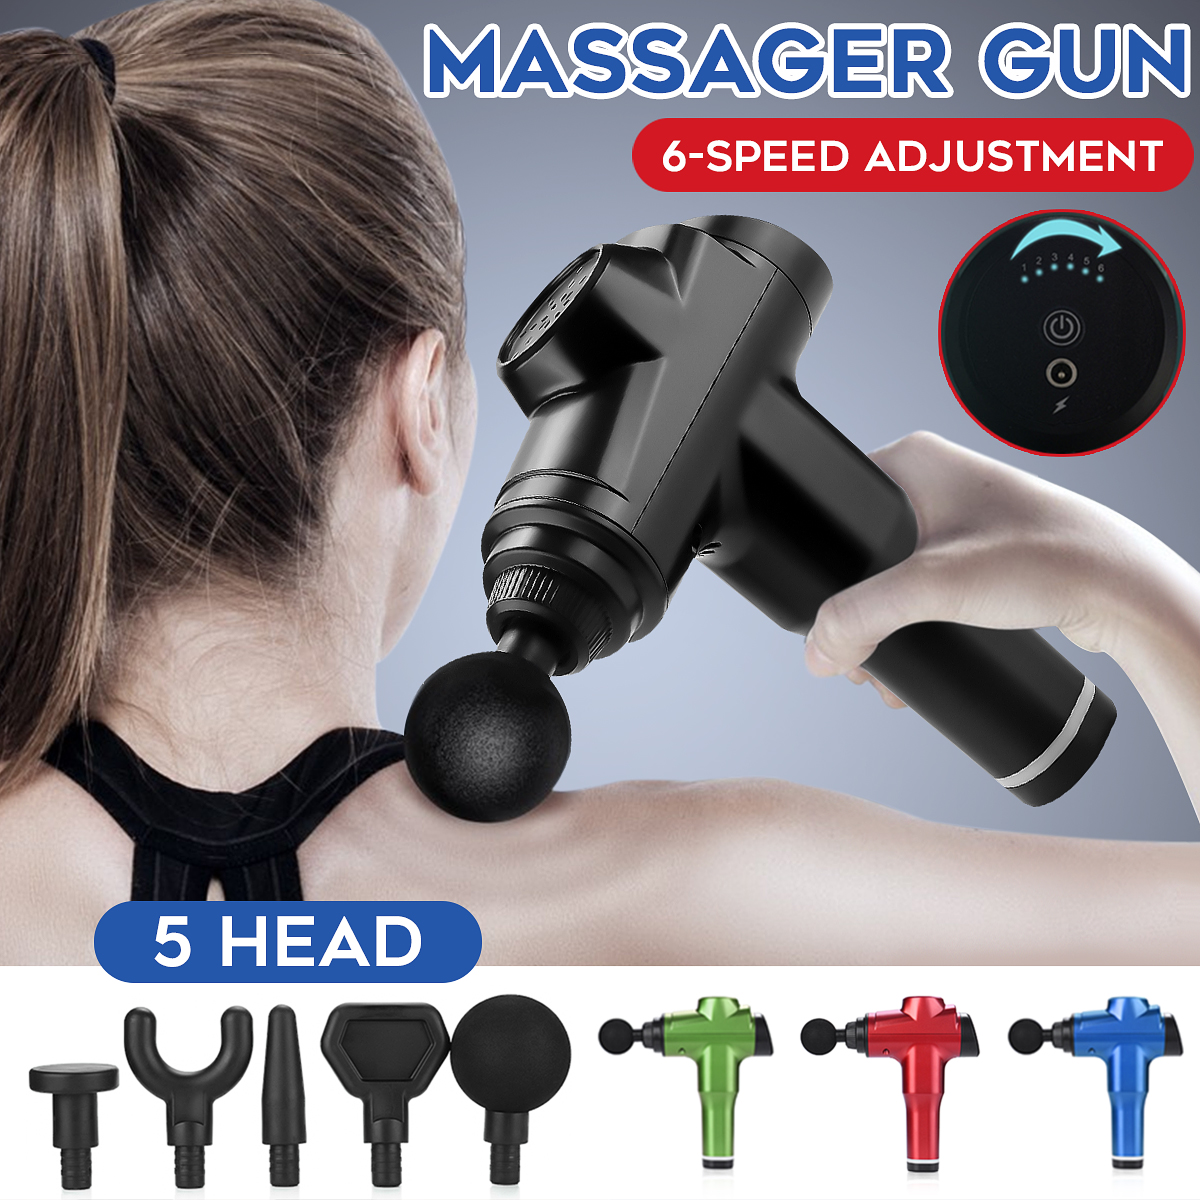 Recahrgable-6-Speed-5-Head-Fascia-Massager-Muscle-Relaxation-Massager-Gym-High-Frequency-Vibration-P-1679196-4